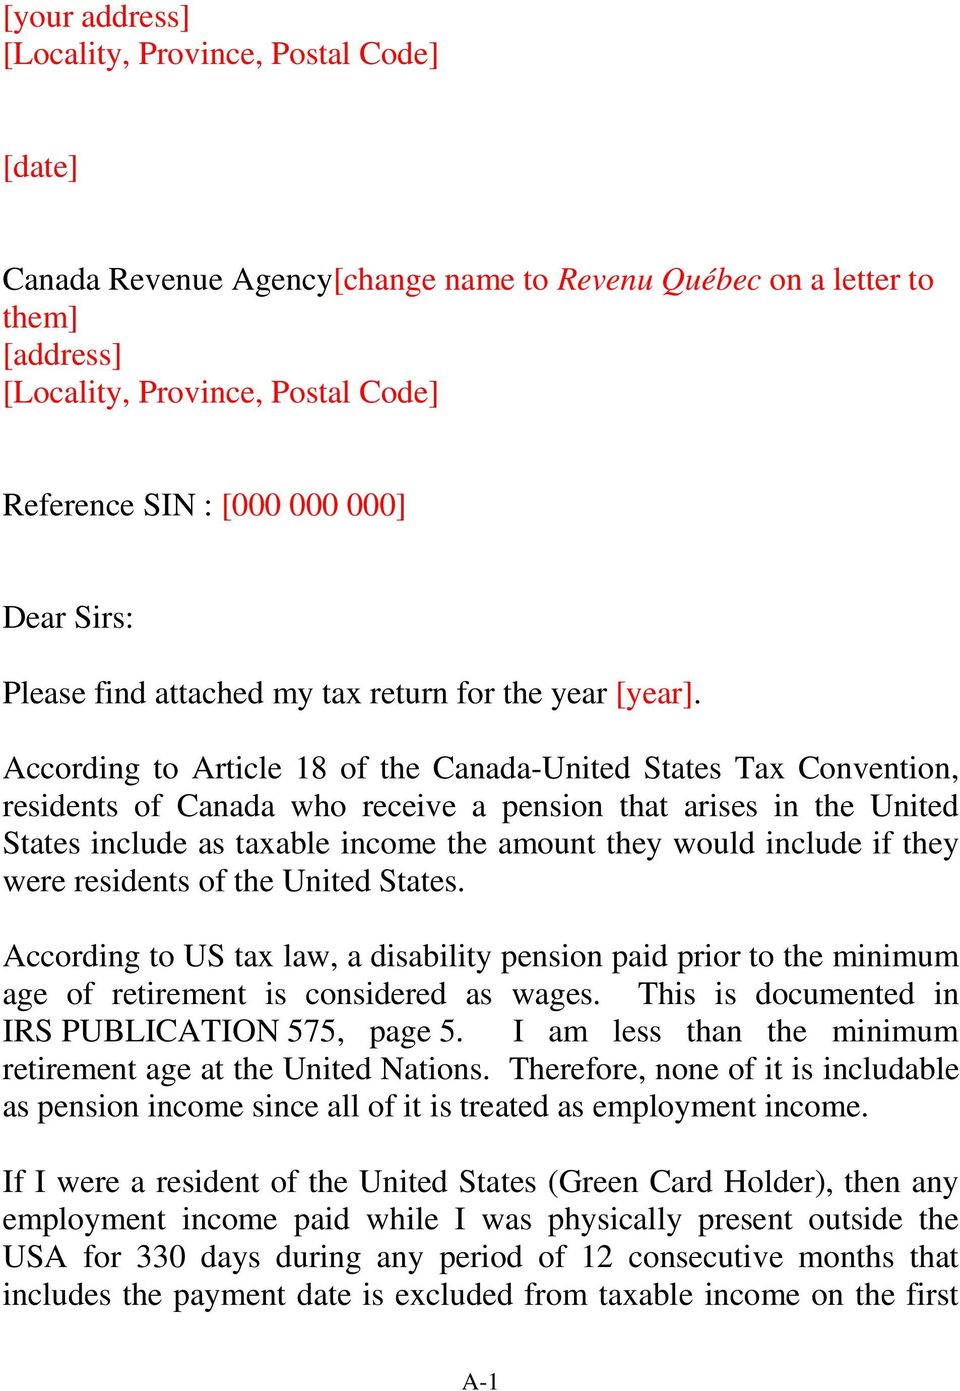 According to Article 18 of the Canada-United States Tax Convention, residents of Canada who receive a pension that arises in the United States include as taxable income the amount they would include